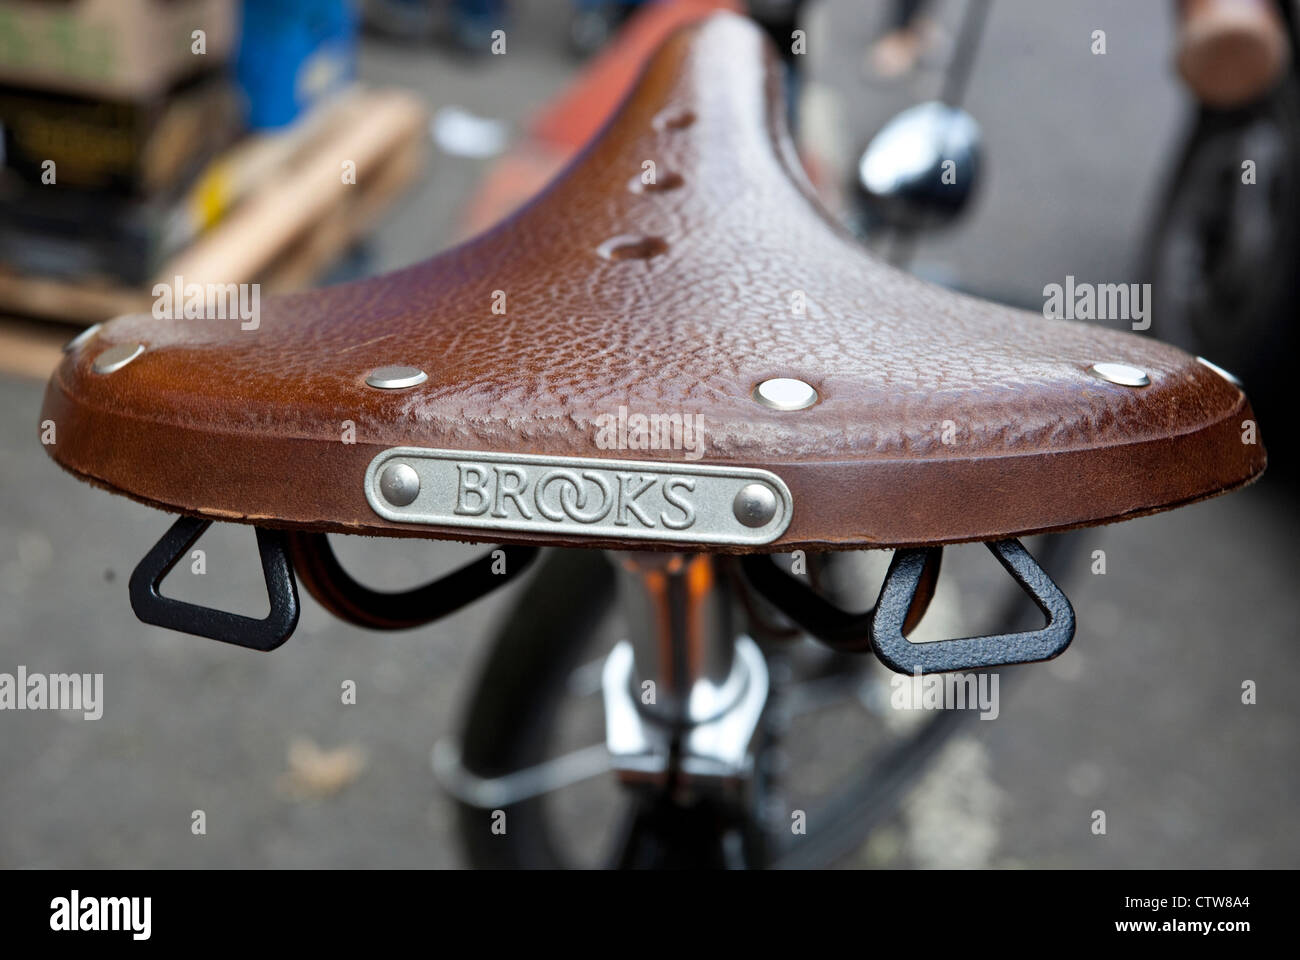 Rear view of a bicycle's saddle, London, England, UK. Stock Photo